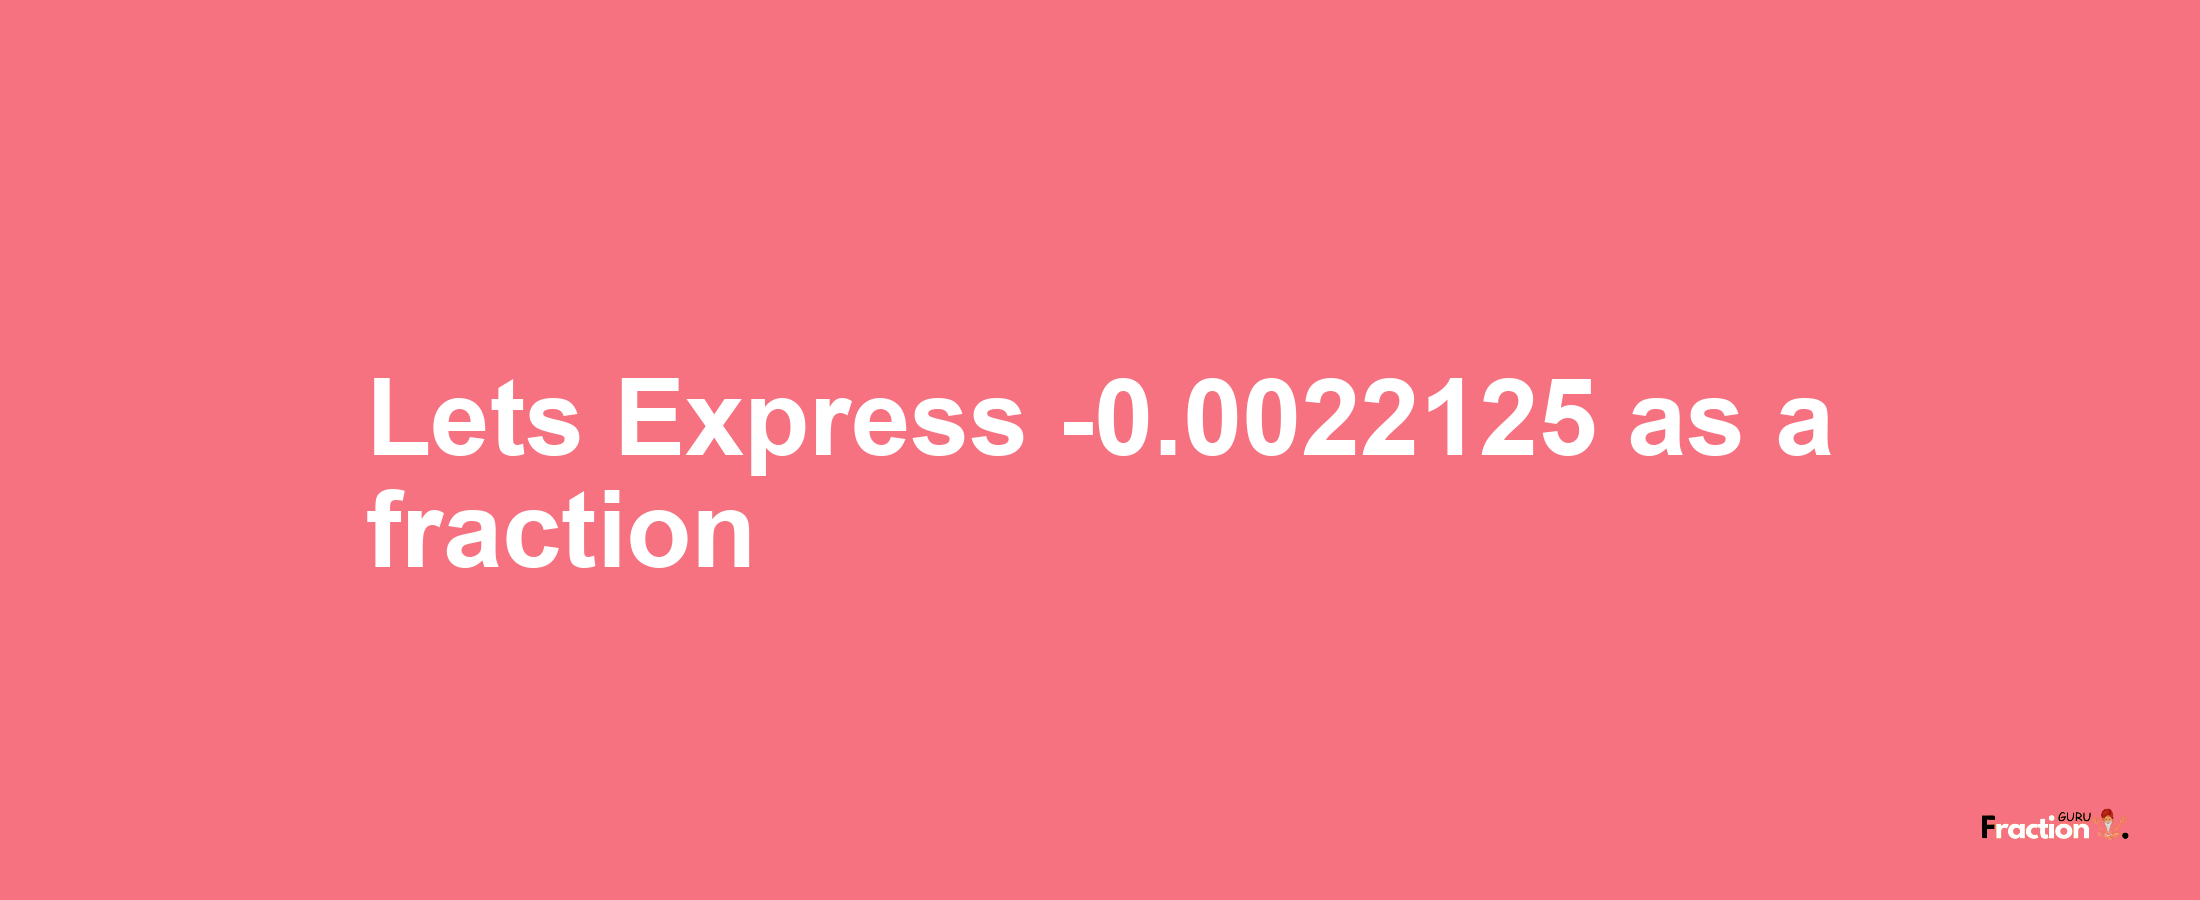 Lets Express -0.0022125 as afraction